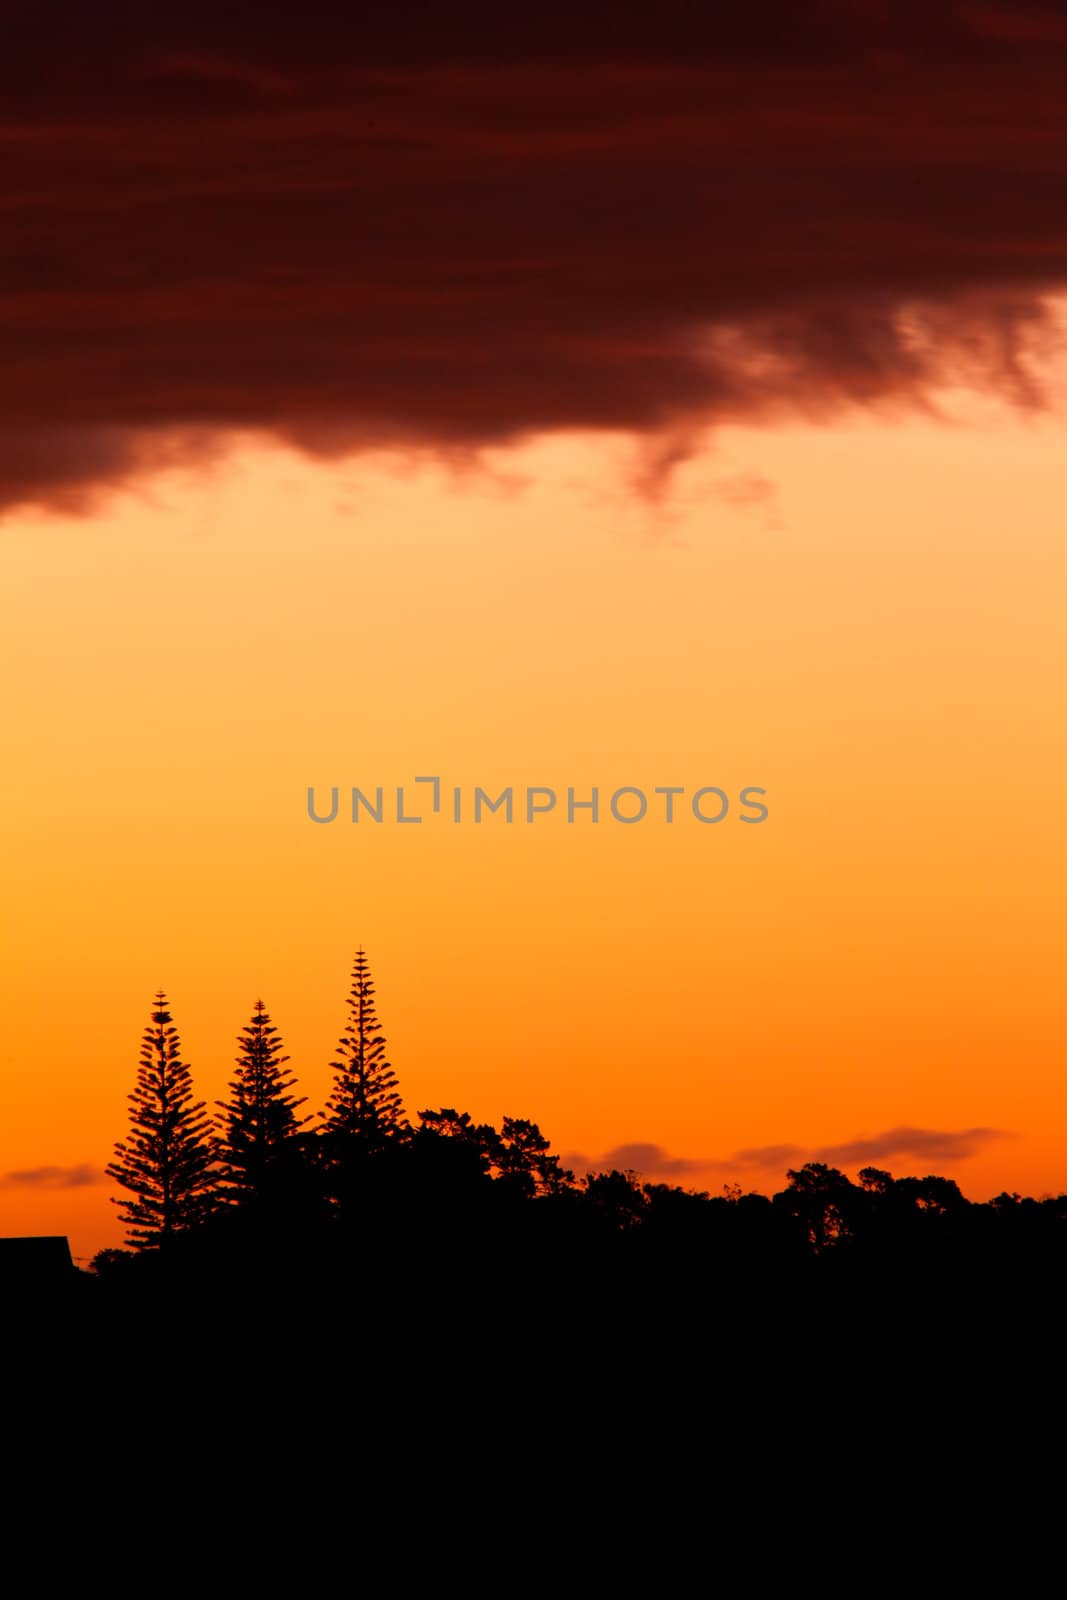 Orange sunset and silhouettes of Norfolk pines by PiLens